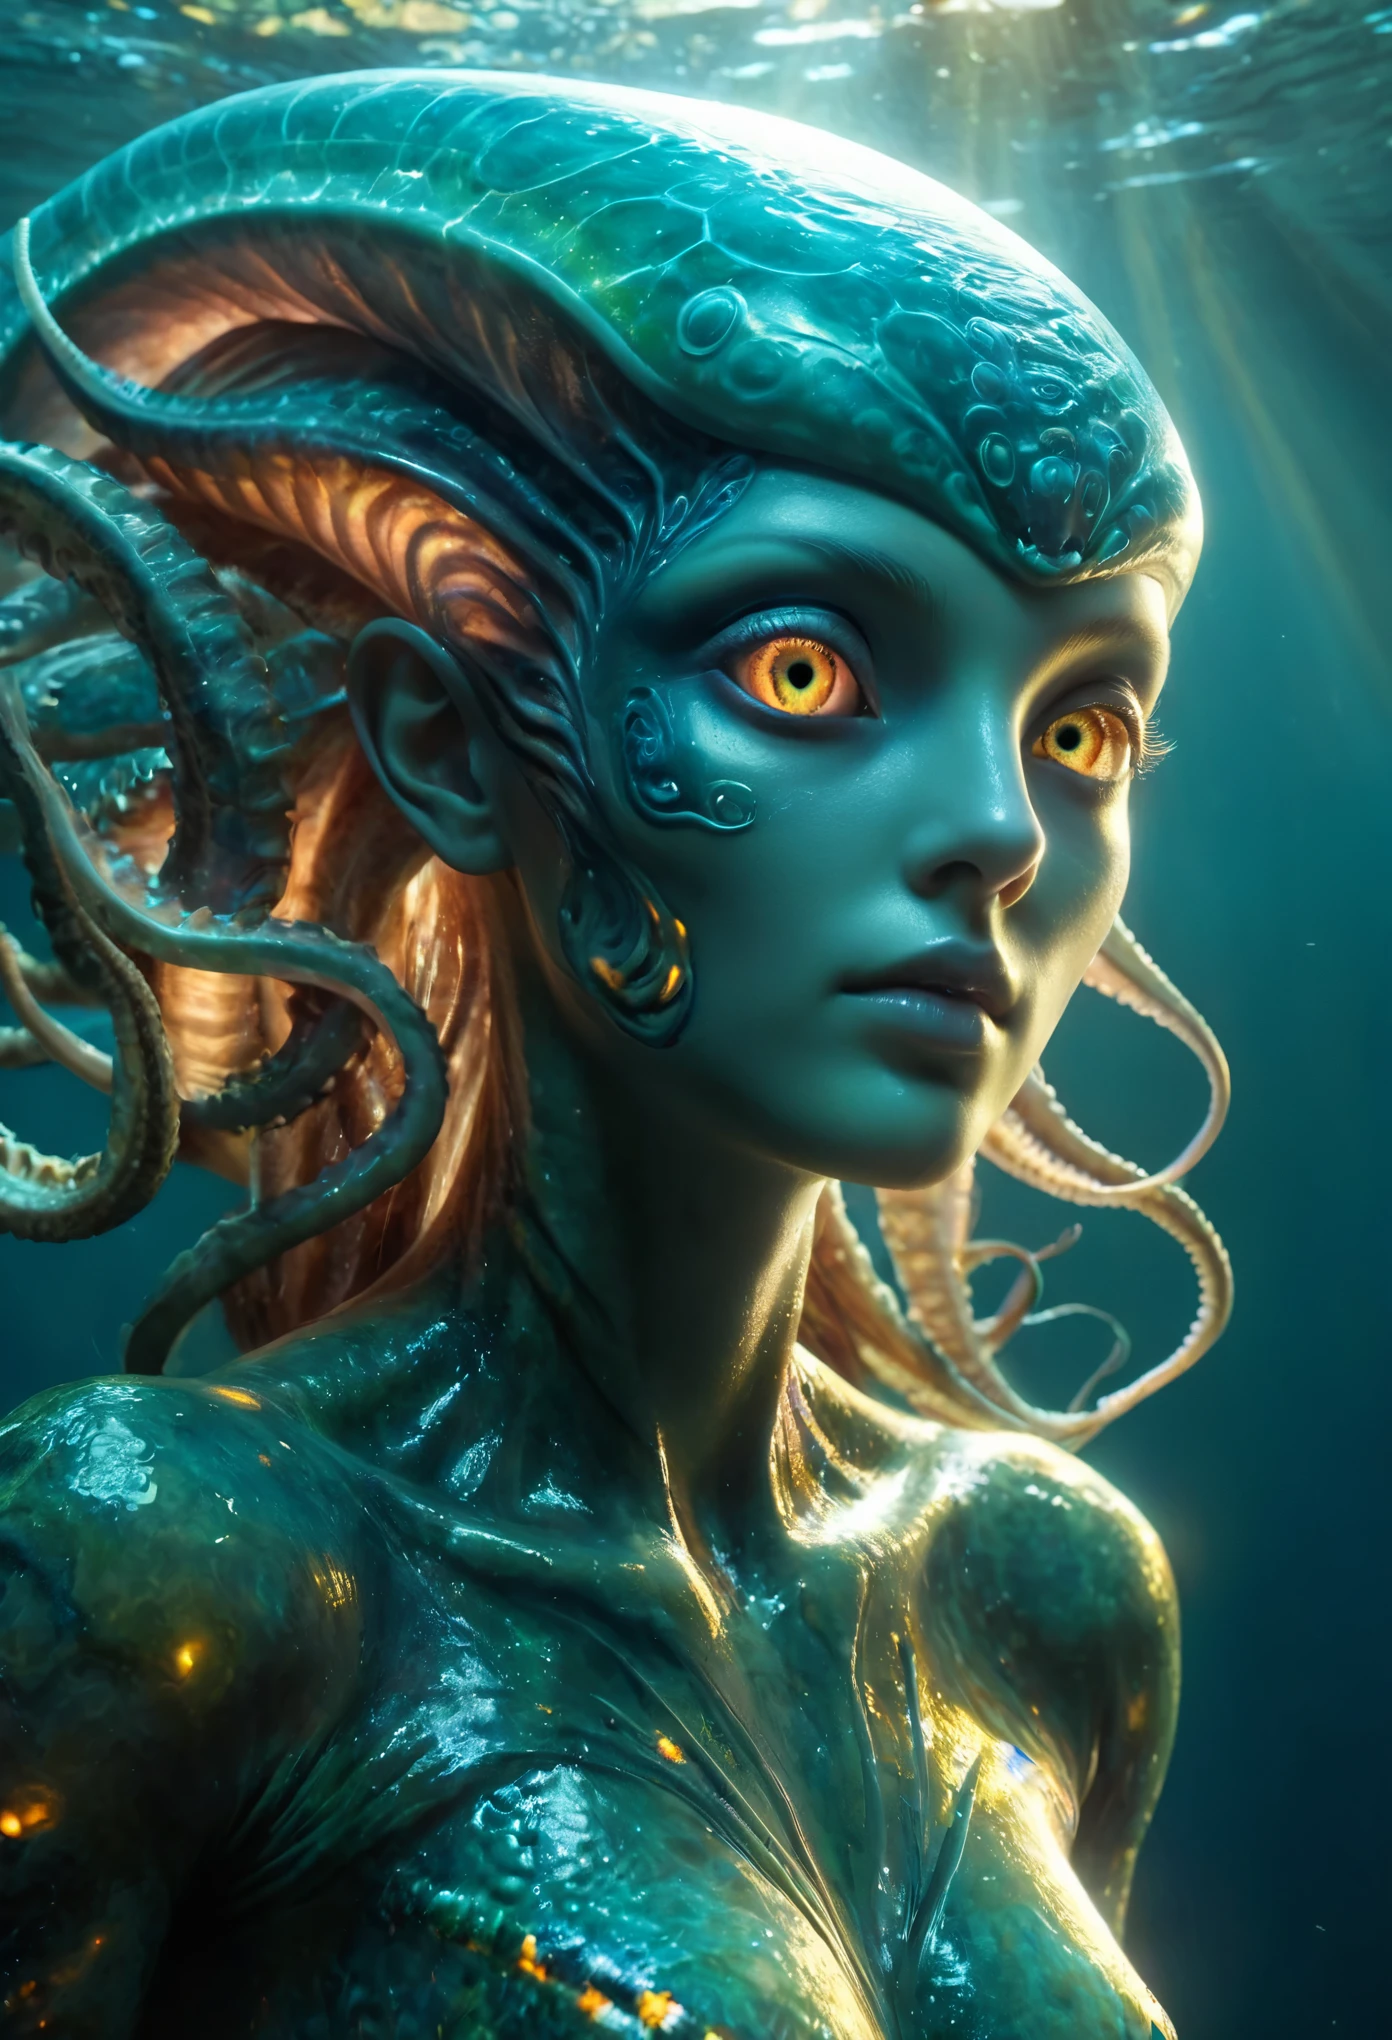 (best quality,4k,highres,masterpiece:1.2),ultra-detailed,(realistic,photorealistic:1.37), (1 beautiful medusa-like female alien who is 18yo:1.8), underwater, vibrant colors, bioluminescence, surreal, grotesque, beautiful detailed eyes, detailed lips, slimy skin, tentacles, intricate patterns, extraordinary creature, unique anatomy, ocean environment, dark abyss, mystifying, mysterious, haunting, eerie, fantasy, hybrid beauty, ethereal, enchanting lighting, With mesmerizing iridescent glowing markings adorning its body, the intricacies of its tentacle parts highlight the rich colors and beautiful soft light. The vast open waters serve as a vivid backdrop, allowing the octopus to soak in every detail, showcasing its Absurd and complex shapes in unparalleled quality. (realistic, hyper-realistic:1.5), thick eyeblows, (superdetailed beautiful opal eyes:1.8), smiling seductively, (no make-up:1.7), (Exoskeleton with beautiful nautilus design:1.8), pale and white skin with visible veins, beautiful nipples, facee paint with nautilus design,